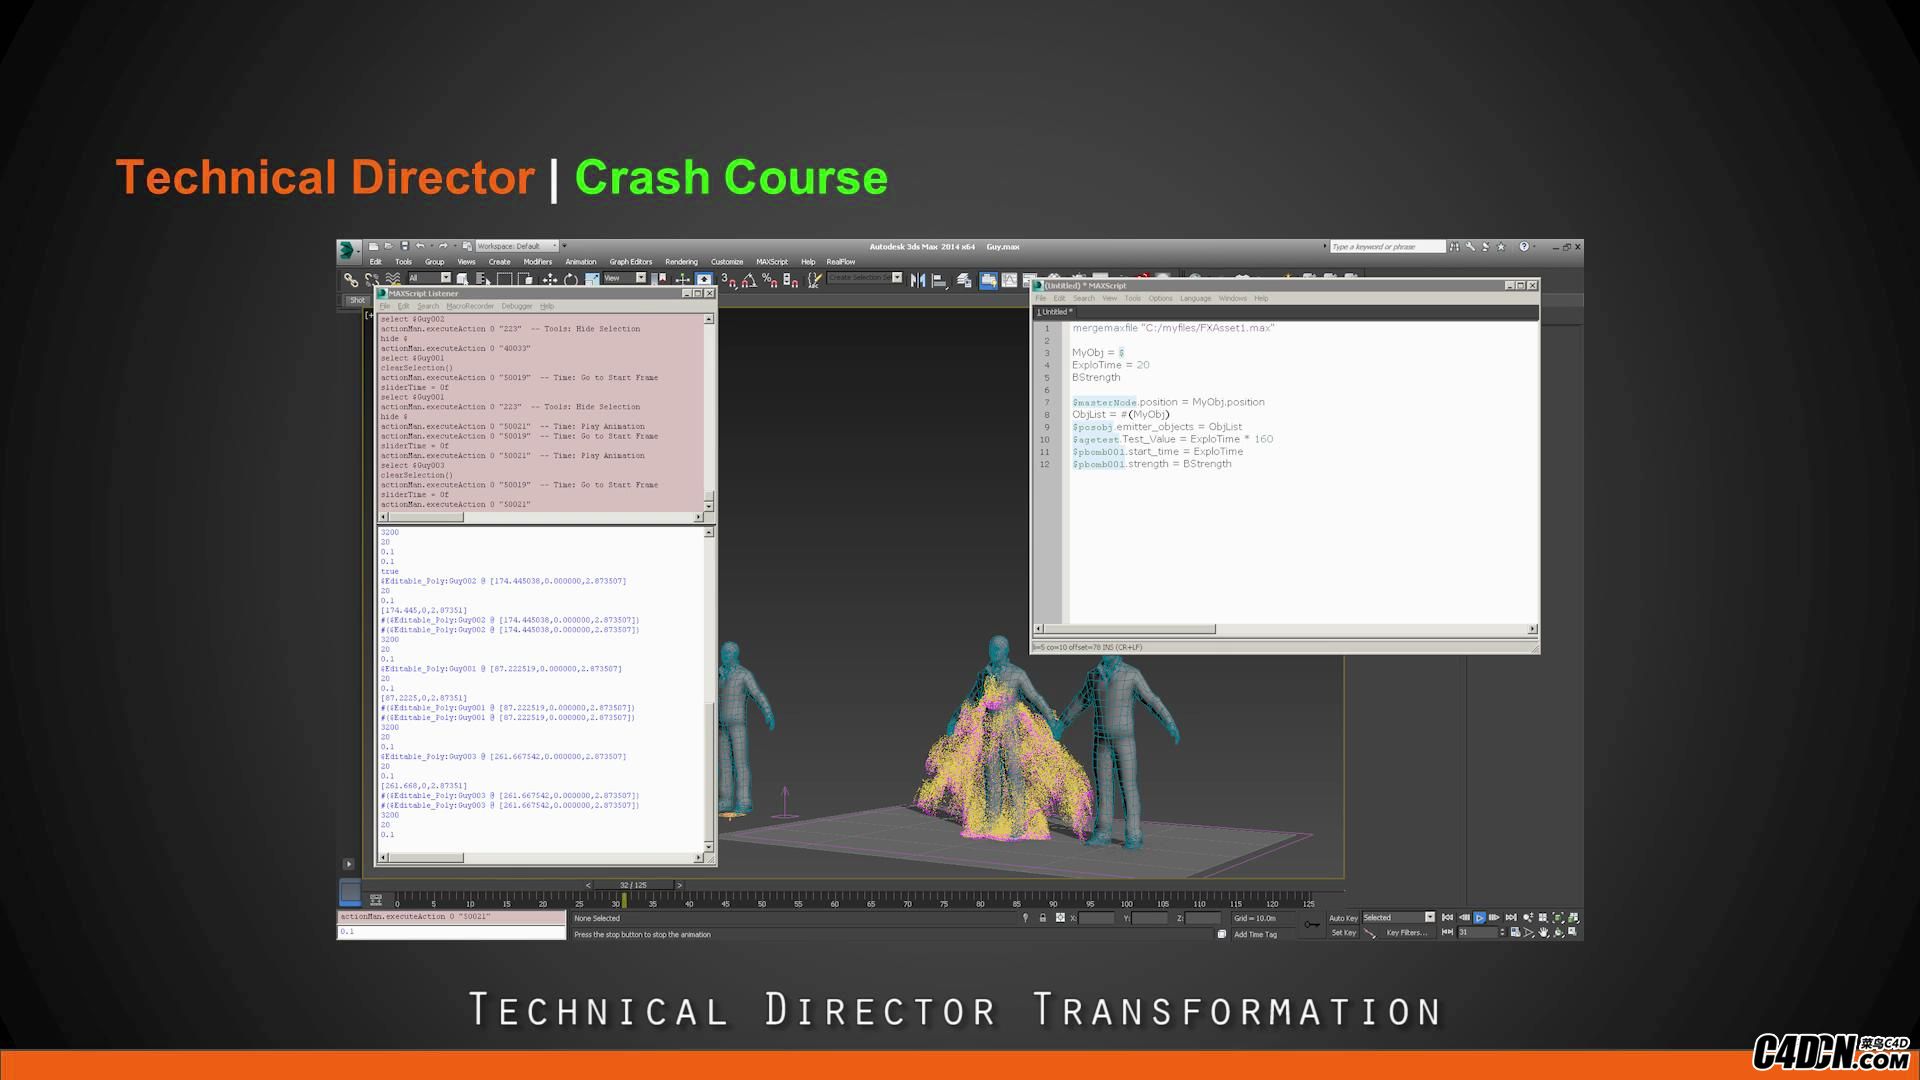 Technical Director Transformation - Crash Course Opt-in video 3_20170118164302.JPG